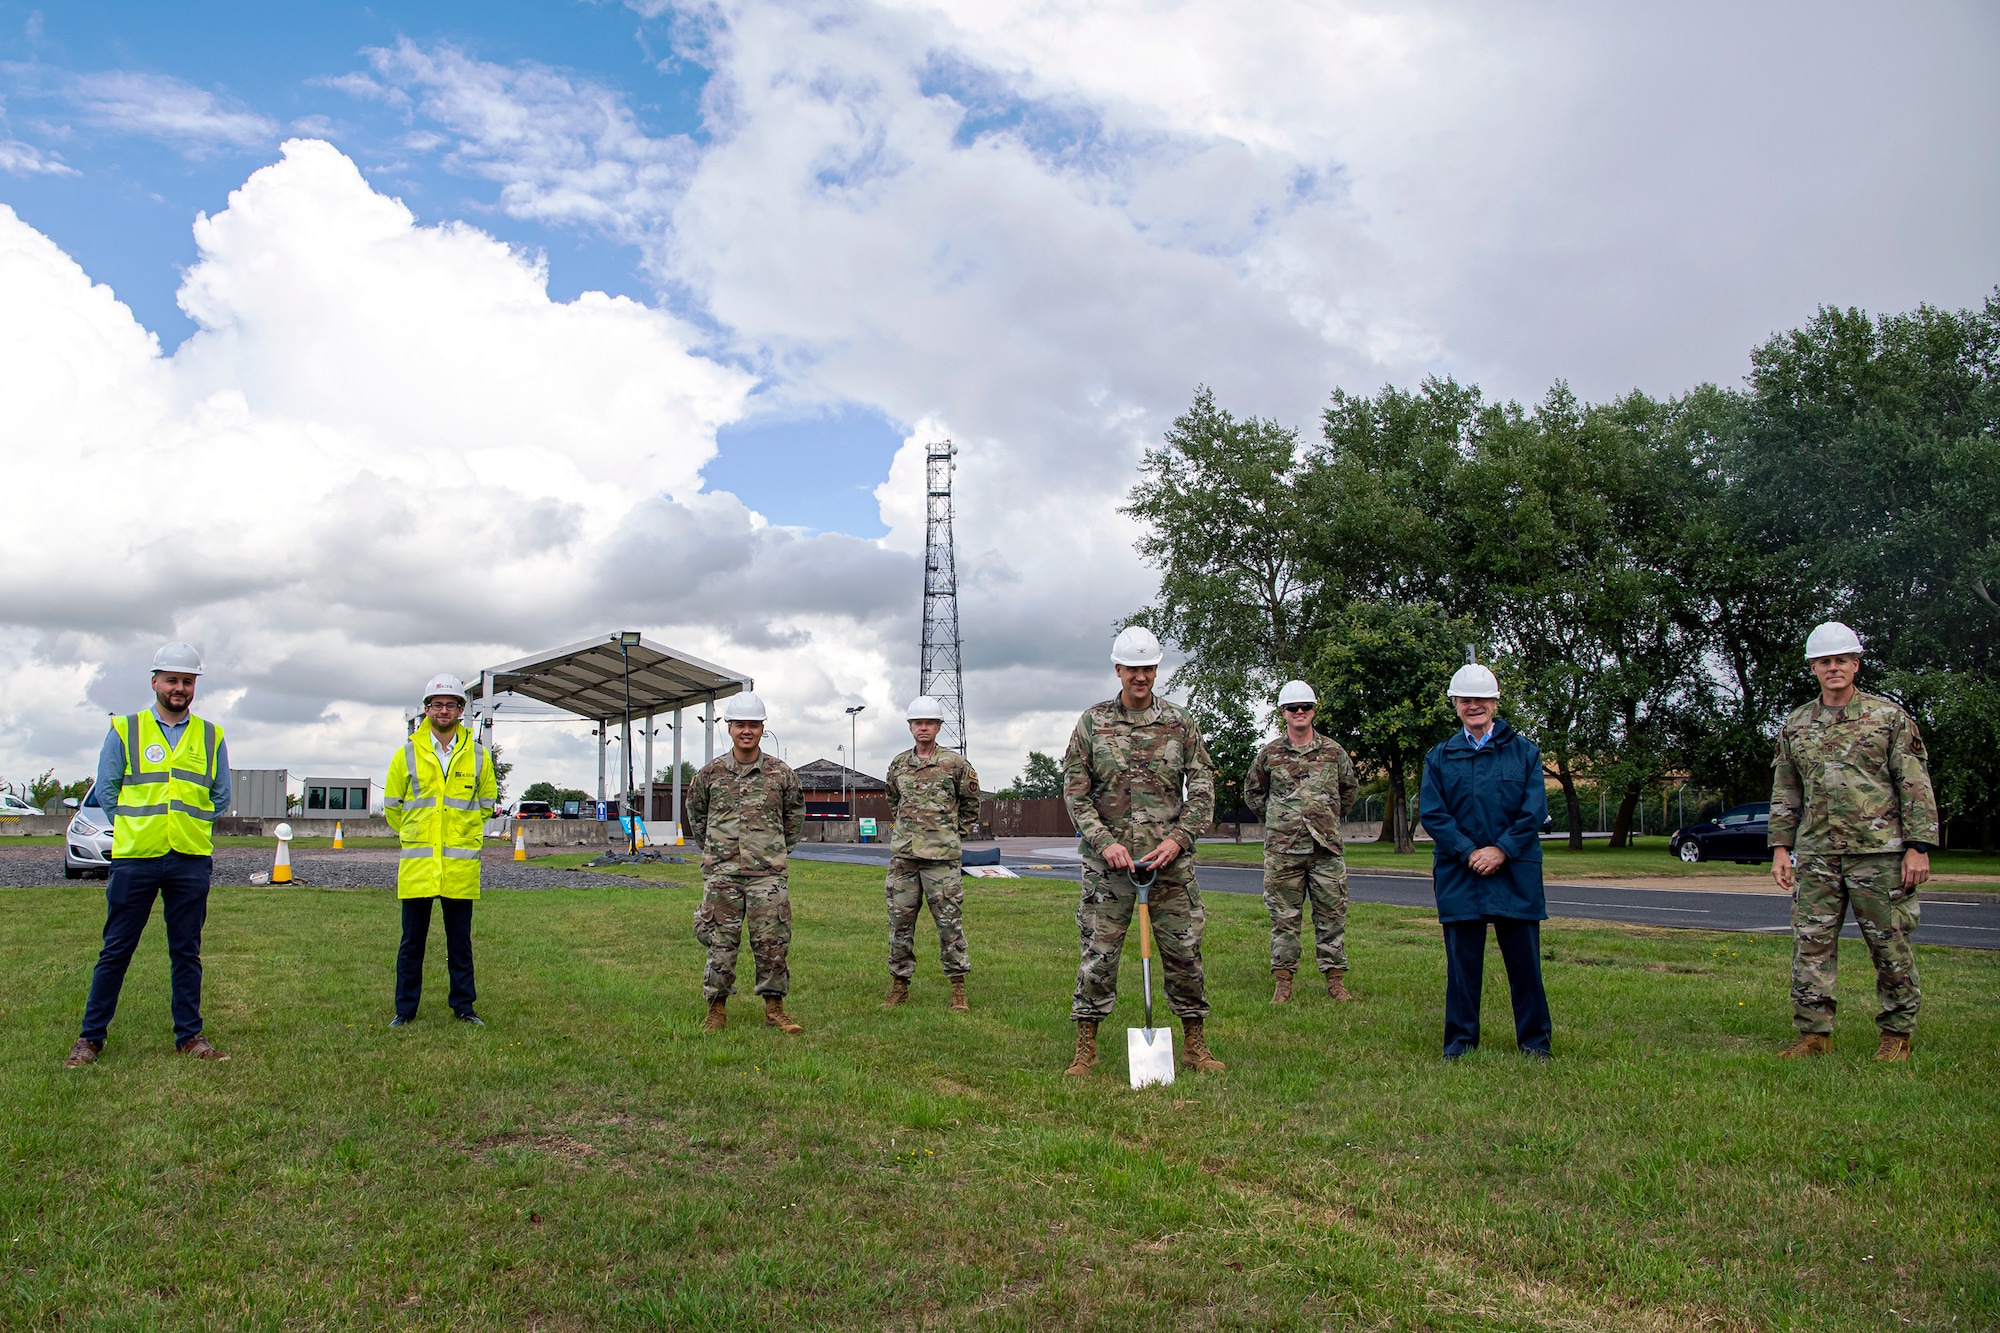 U.S. Air Force Col. Christopher J. Bromen (center), 423d Air Base Group commander, breaks ground on a construction project for the main gate at RAF Alconbury, England, July 2, 2020. This project will provide a large vehicle inspection station, channelized traffic flow for better security and improved safety for personnel. Construction will officially commence on July 6, 2020 and effective from that date, installation entry and exit procedures will be modified to support the construction project. (U.S. Air Force photo by Senior Airman Eugene Oliver)